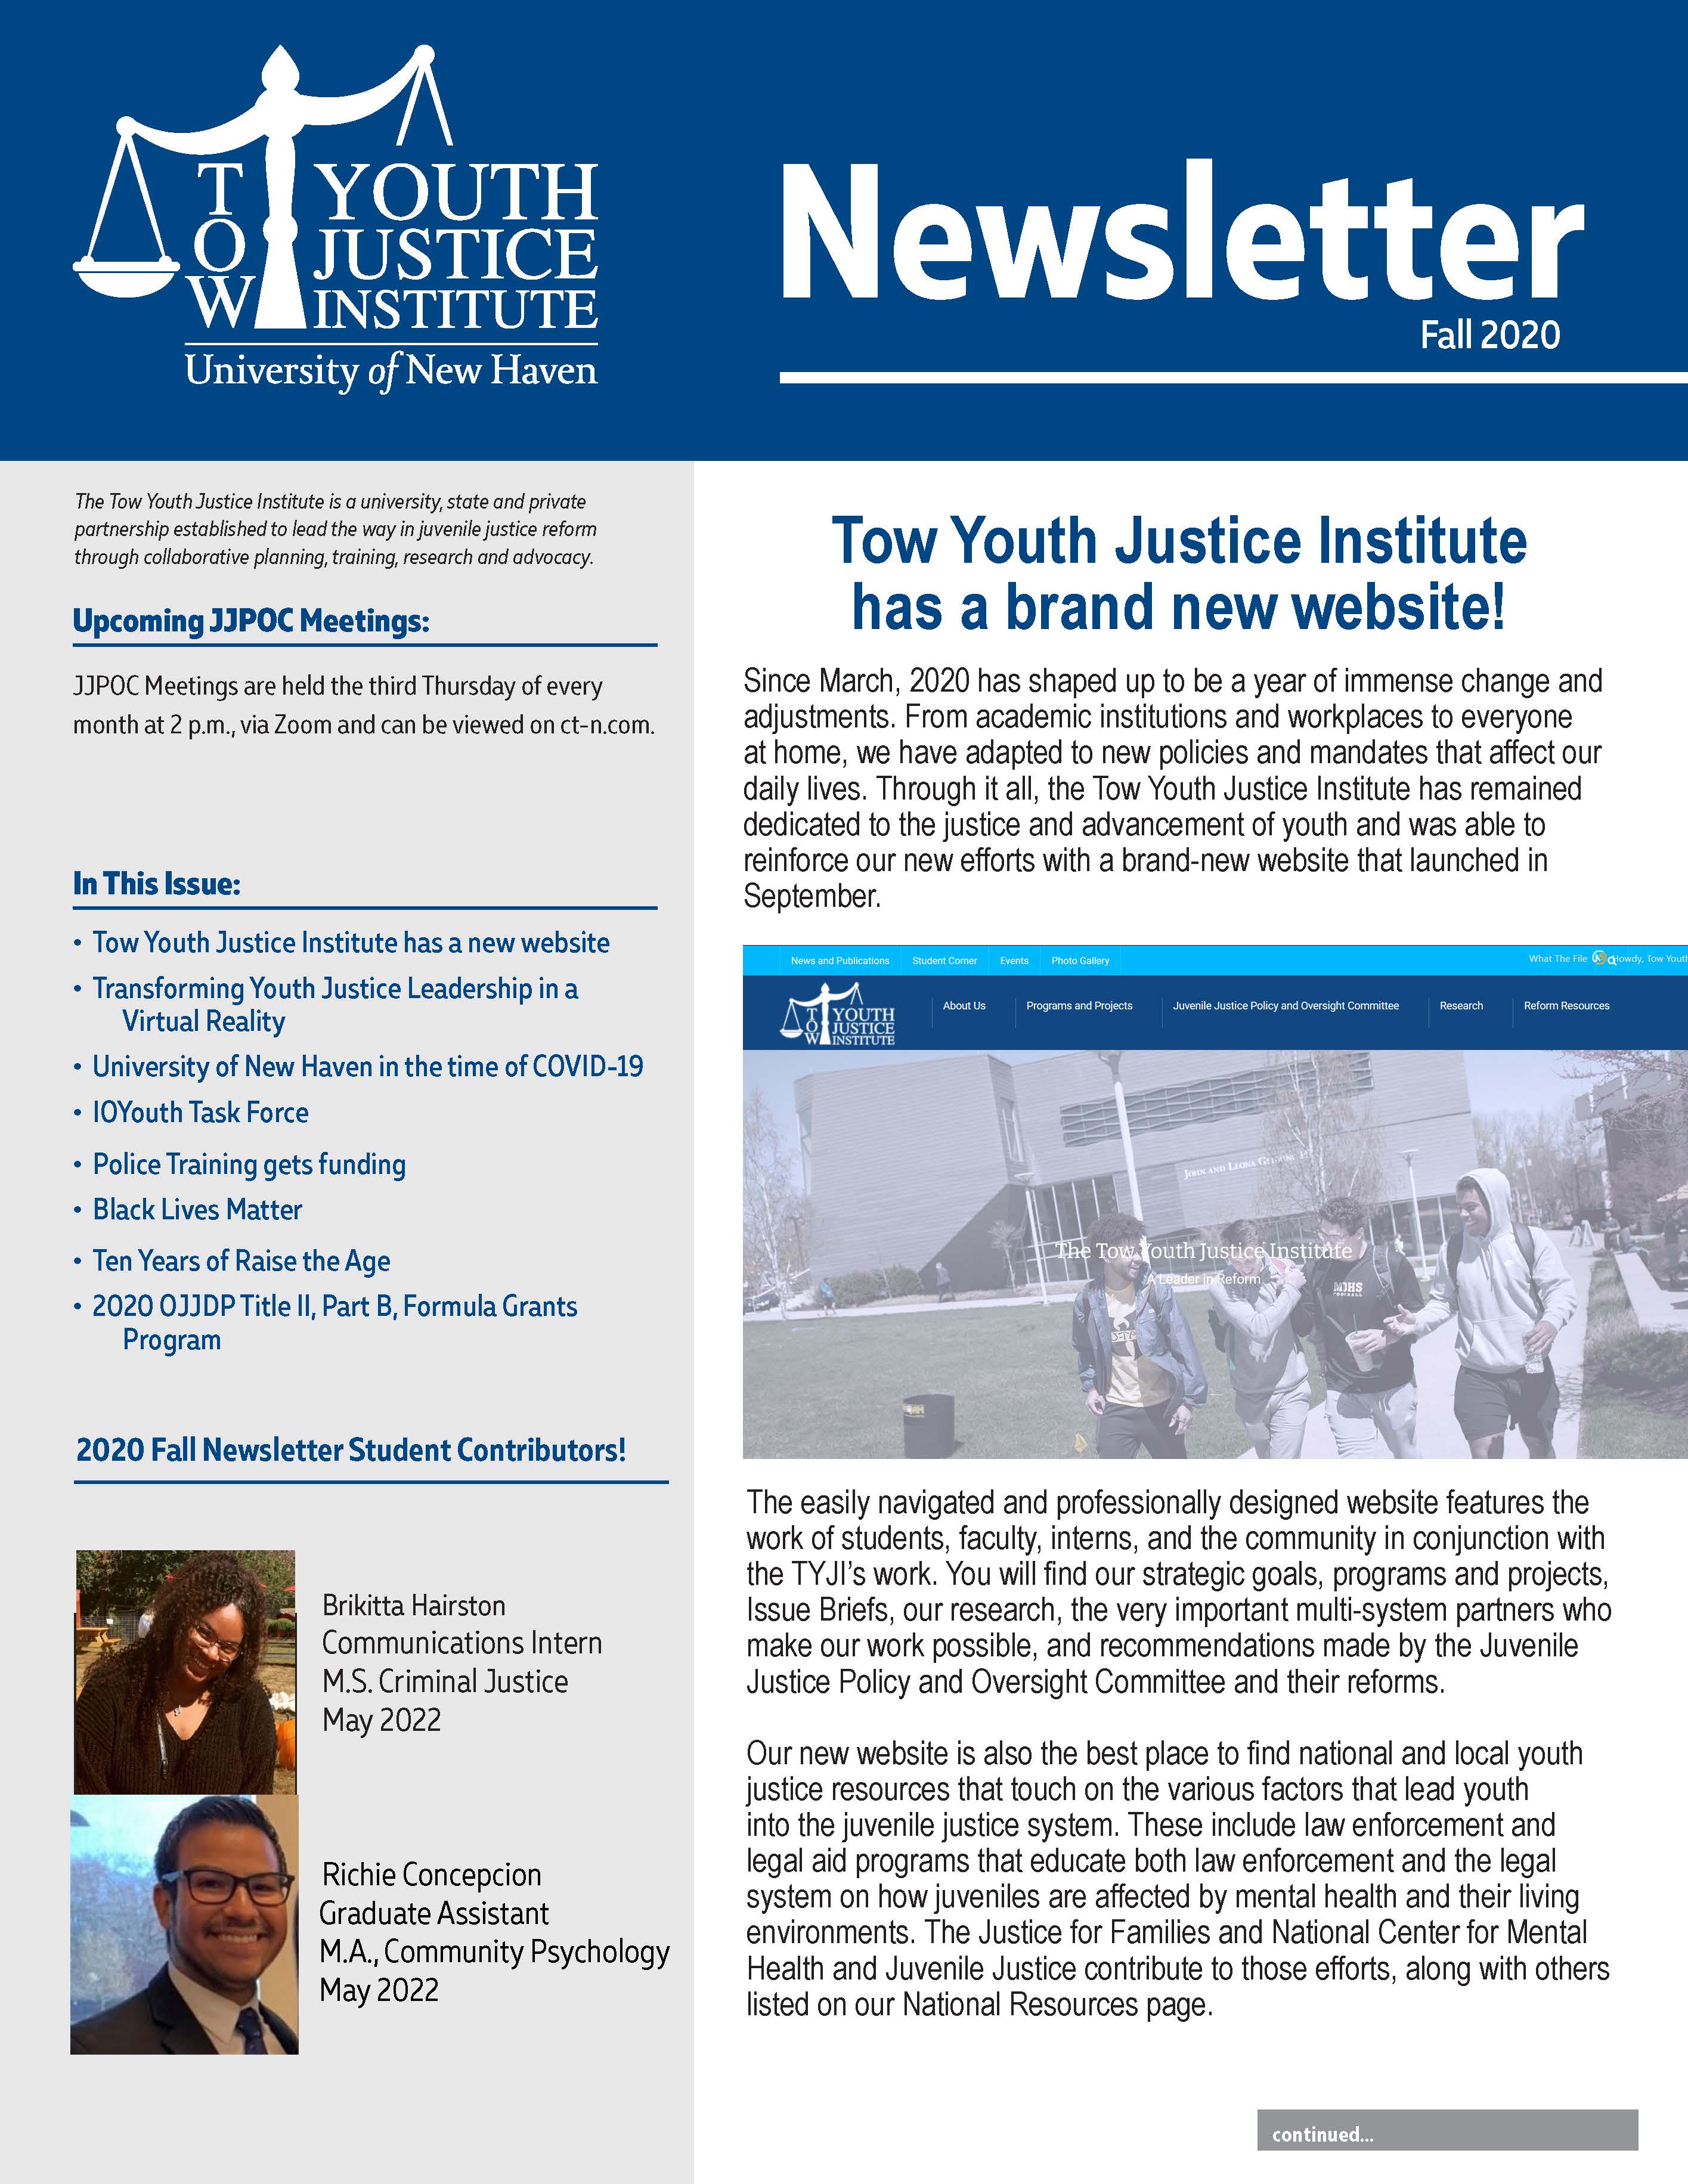 Check out our Fall Newsletter!